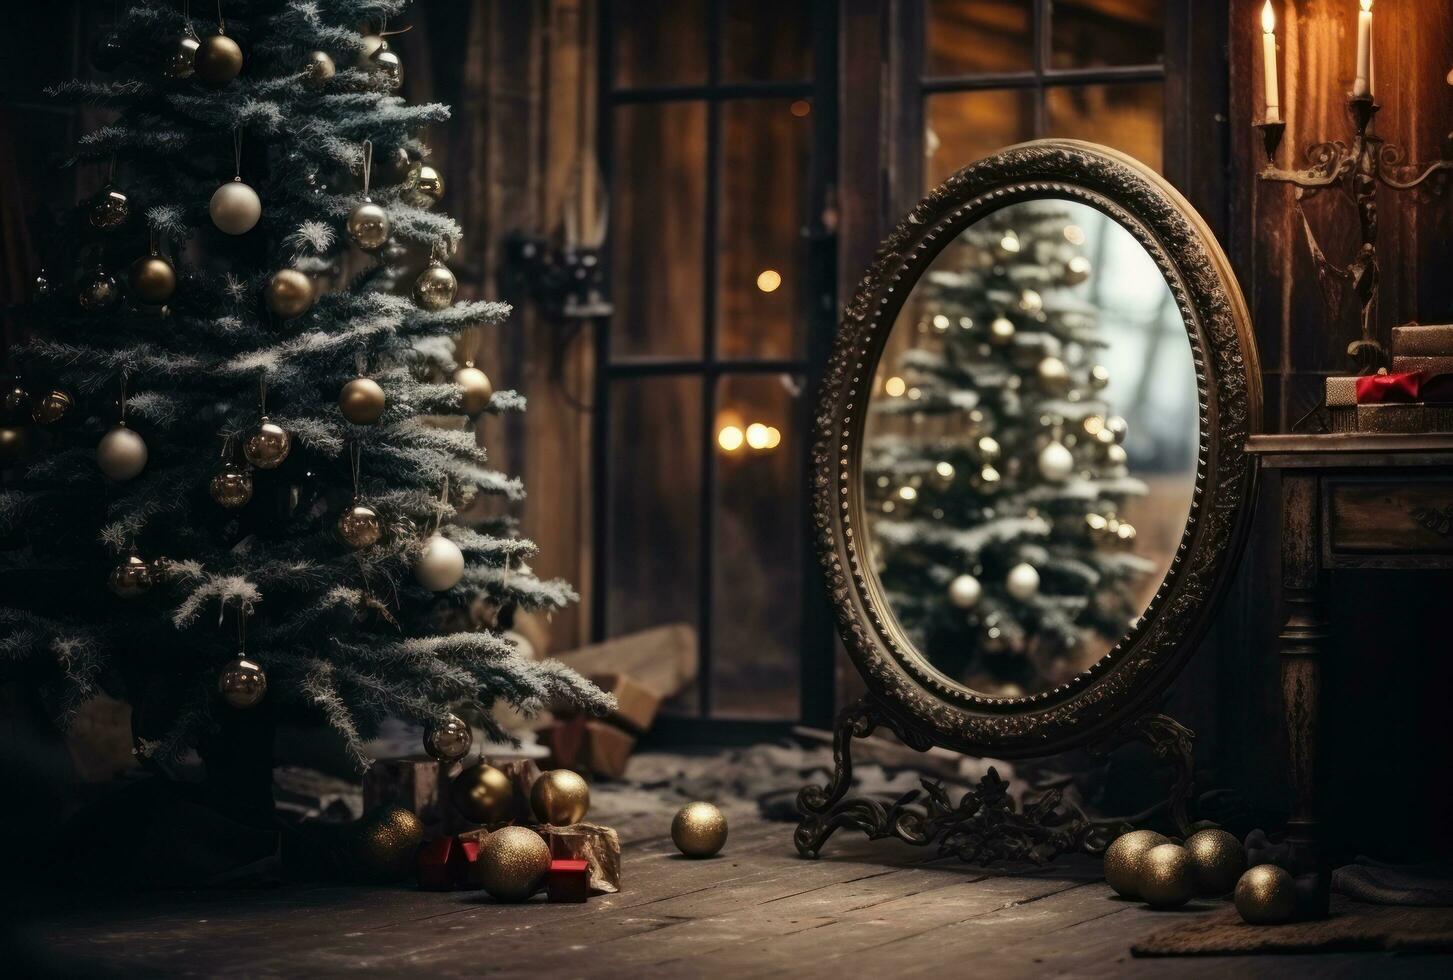 Room in an old house, an old mirror hangs on the wall, in the mirror there is an image of a decorated New Year tree photo